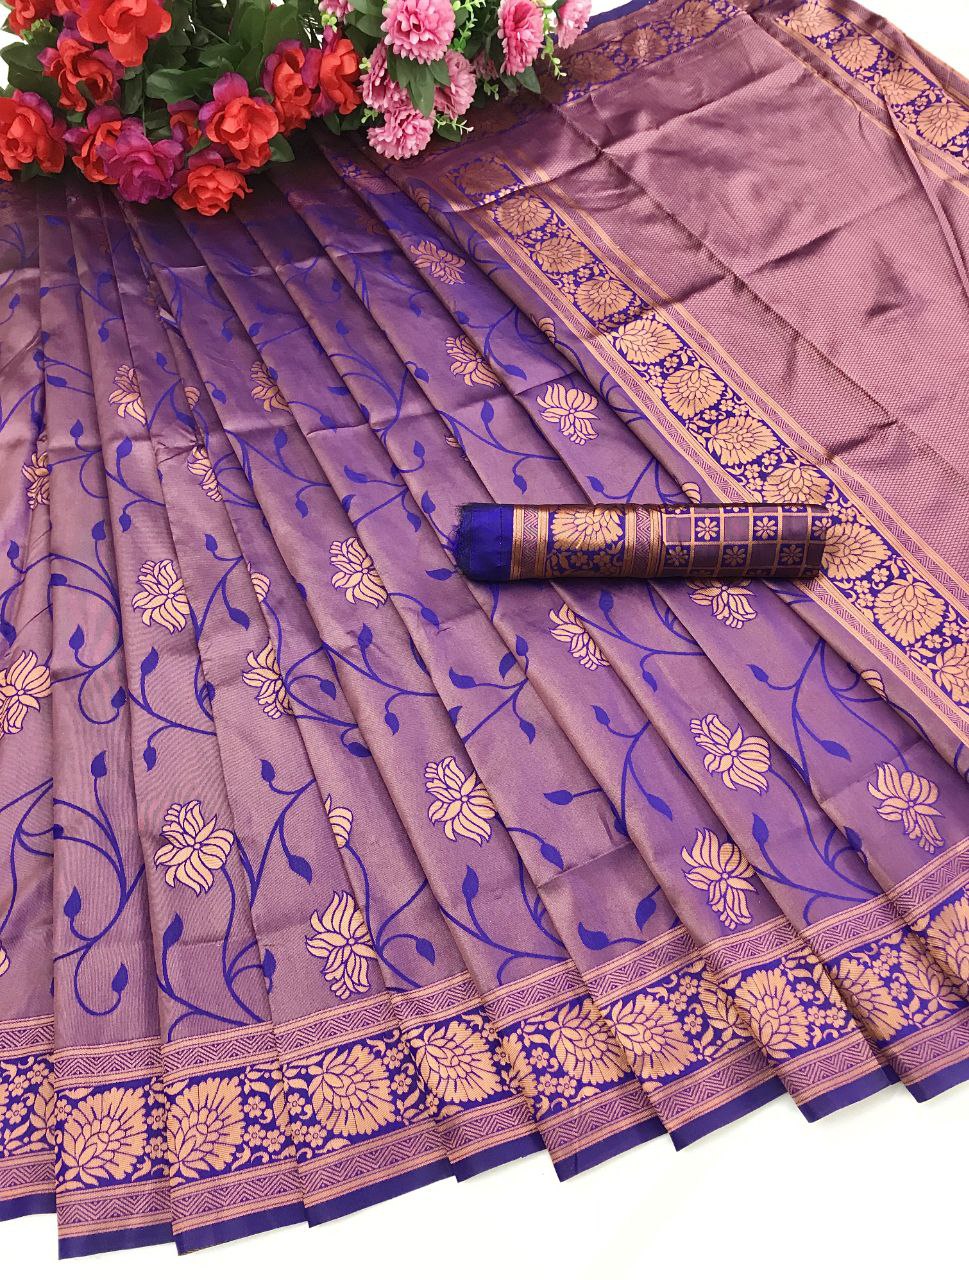 Puple Kanjivaram saree With Copper Border for wedding and party wear